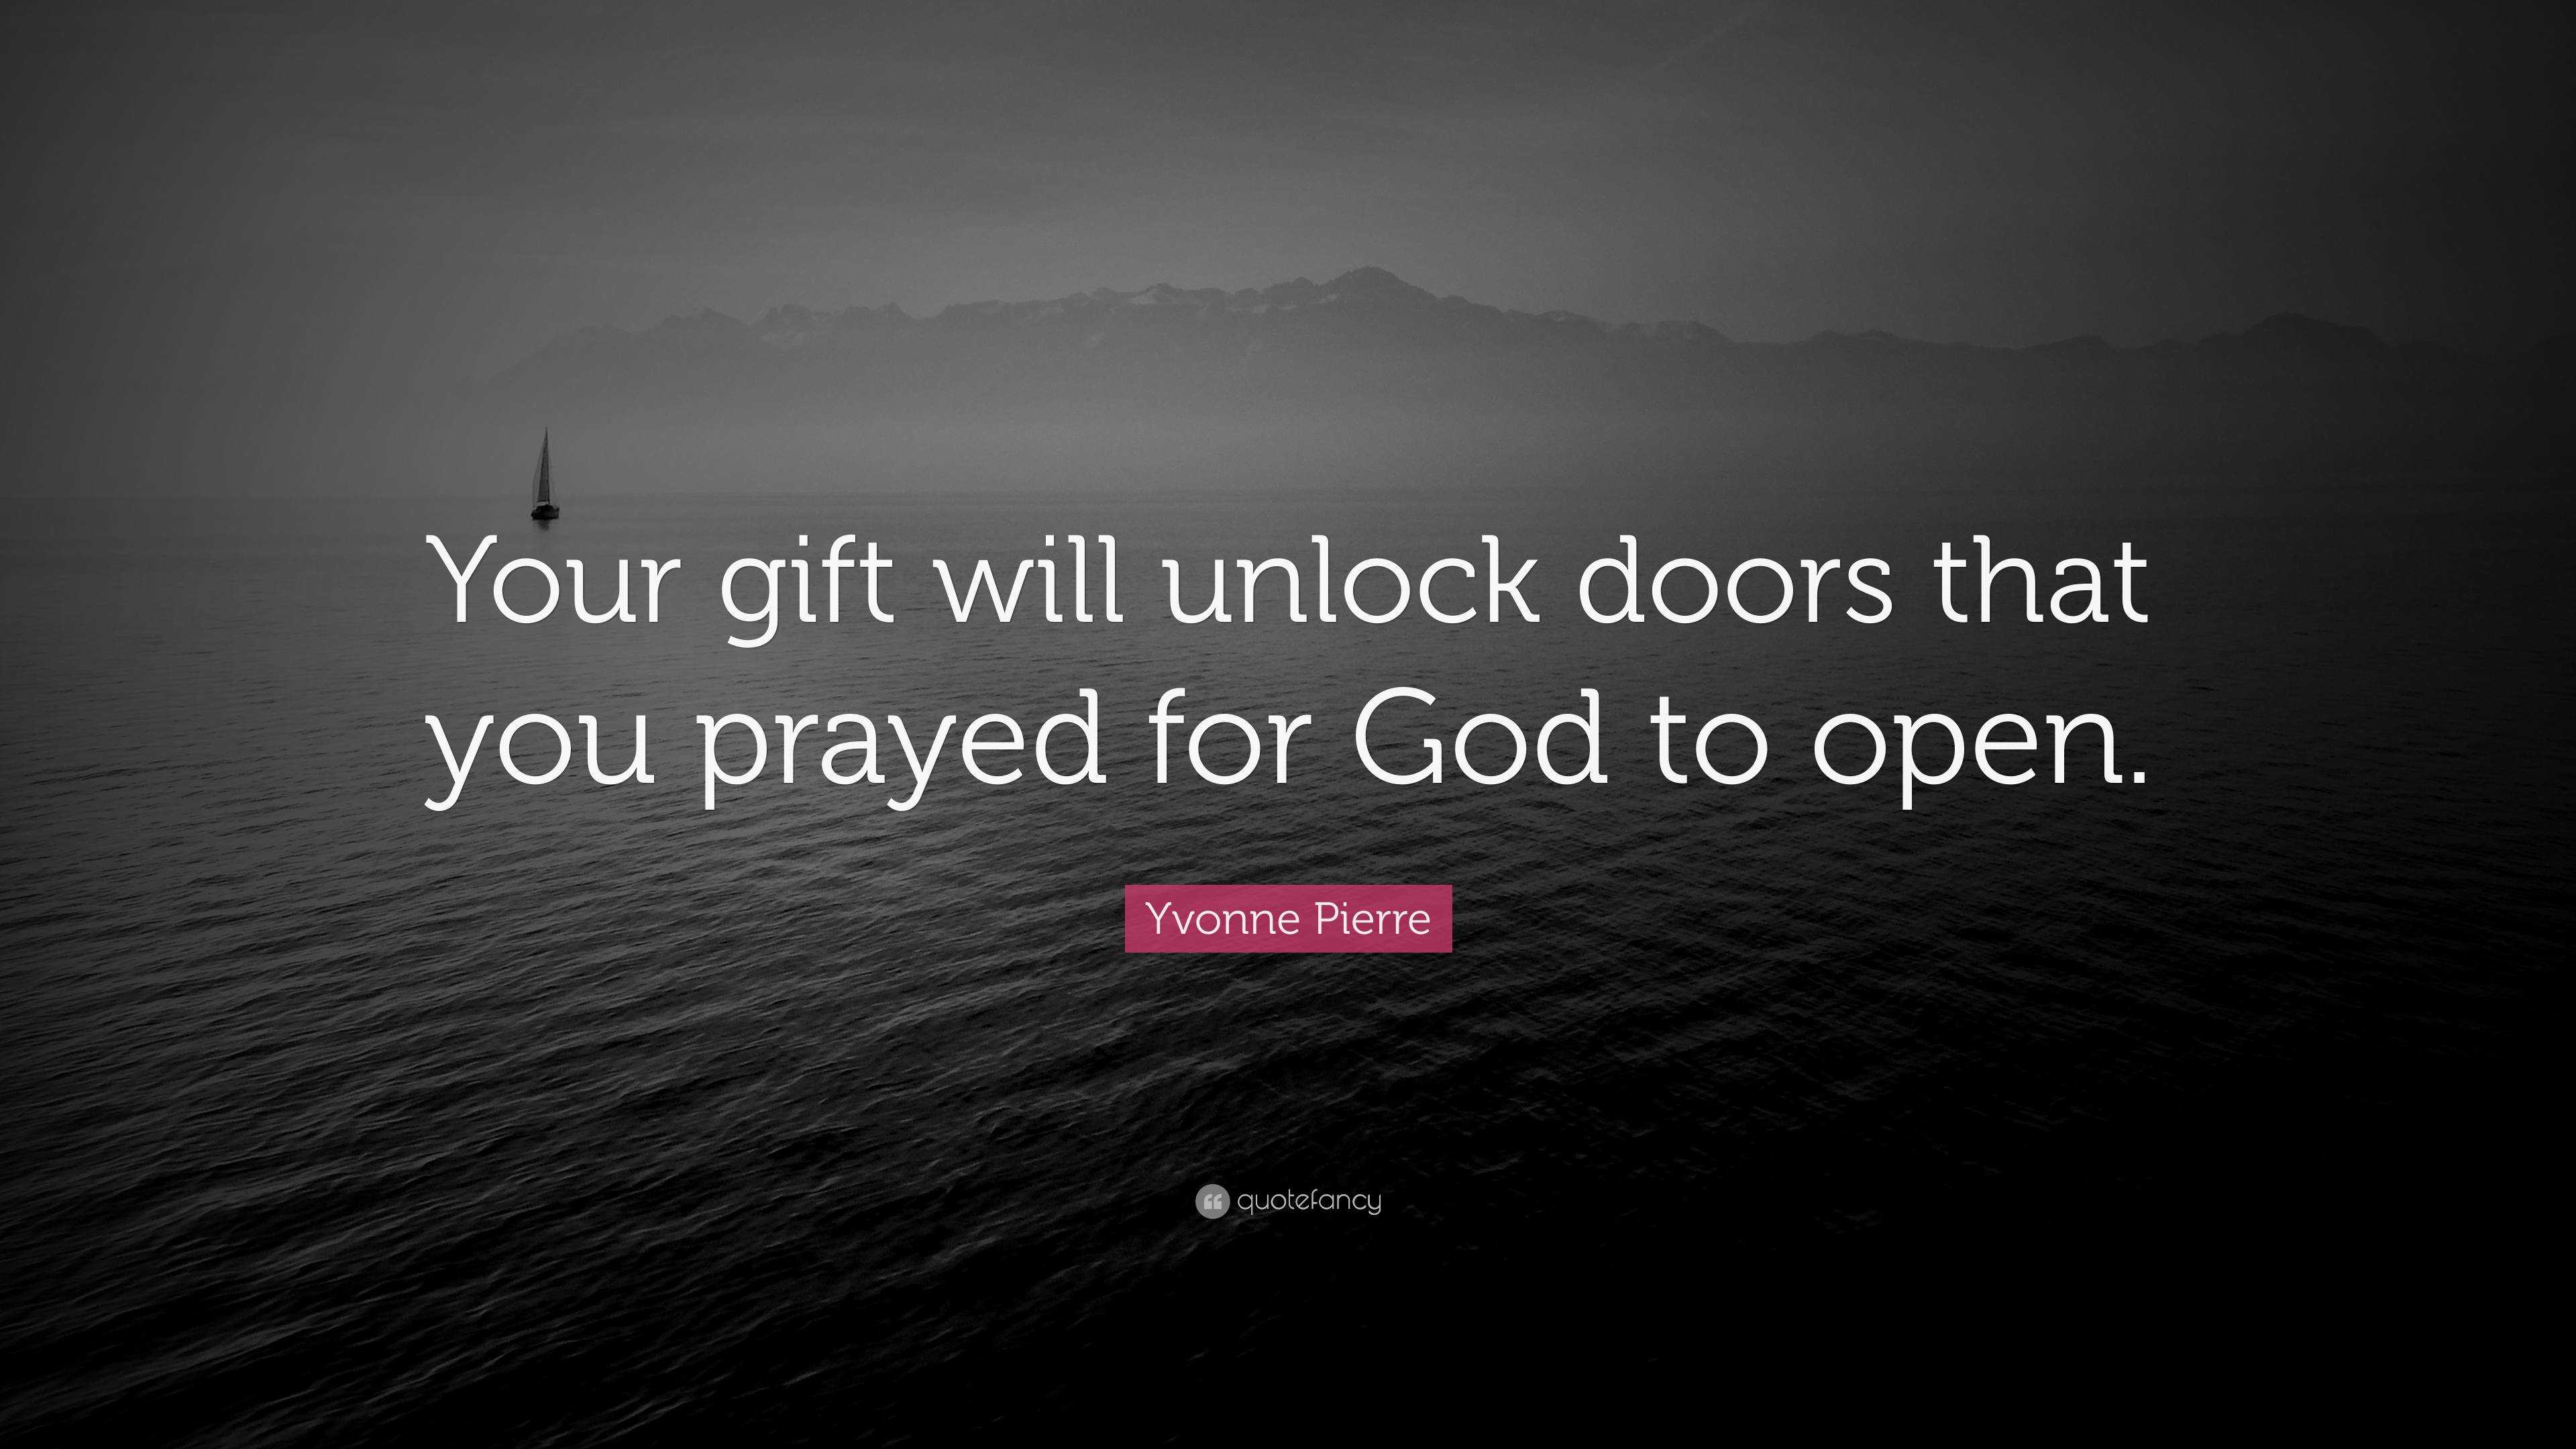 Yvonne Pierre Quote: “Your gift will unlock doors that you prayed for ...